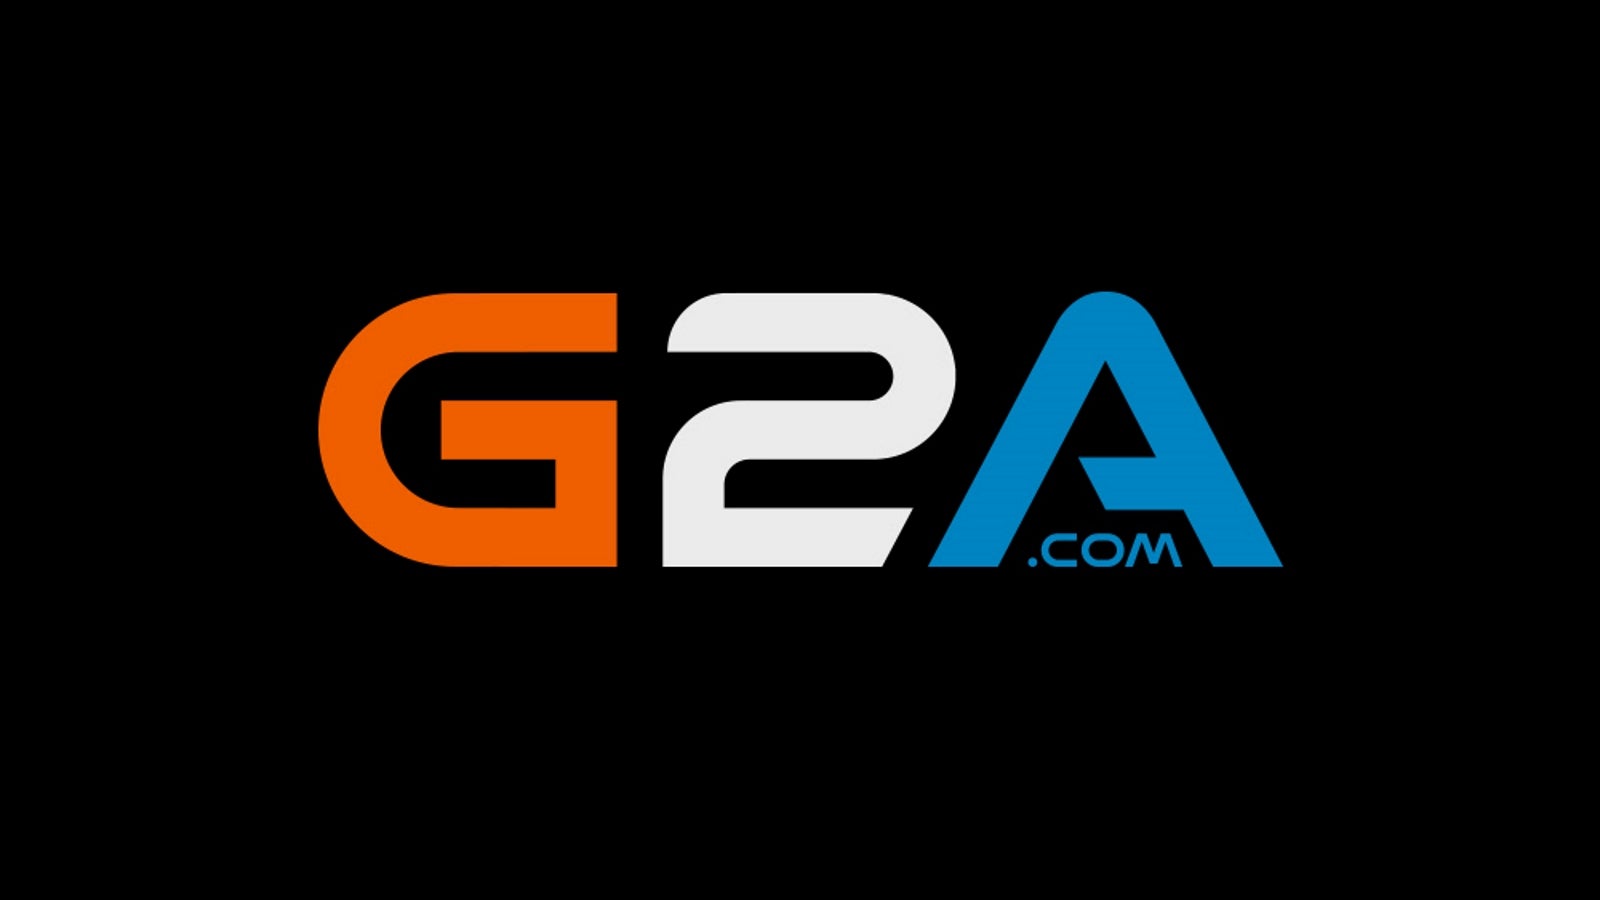 Image for Subnautica developer claims key reseller G2A owes them $300,000